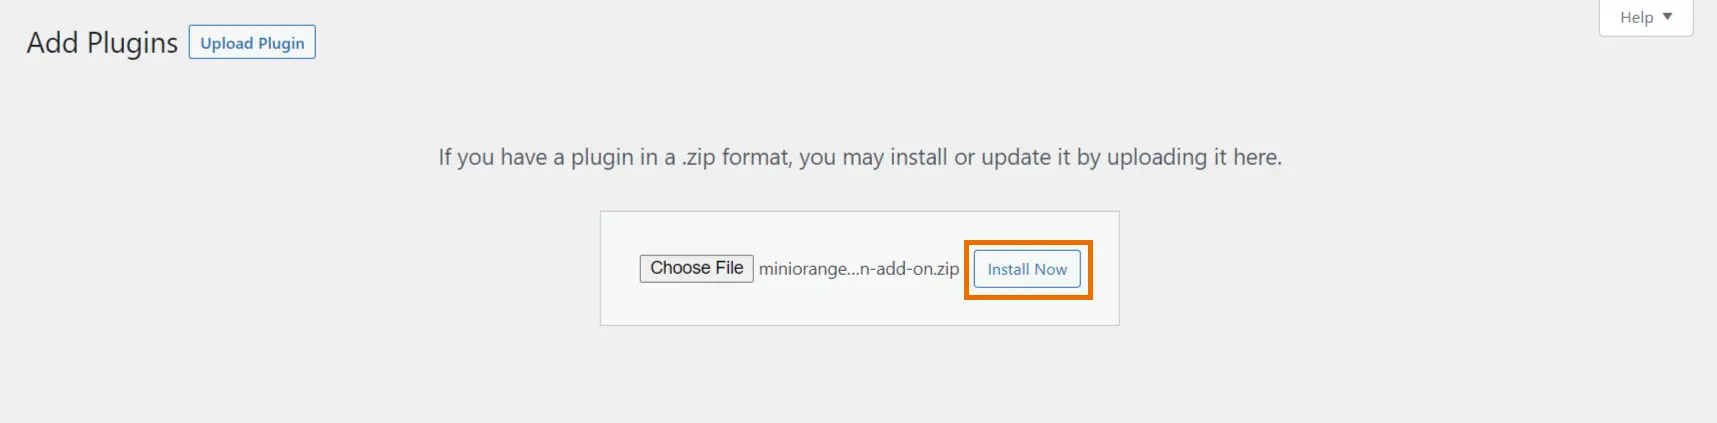 Third Party User Profile Integration add-on upload and install